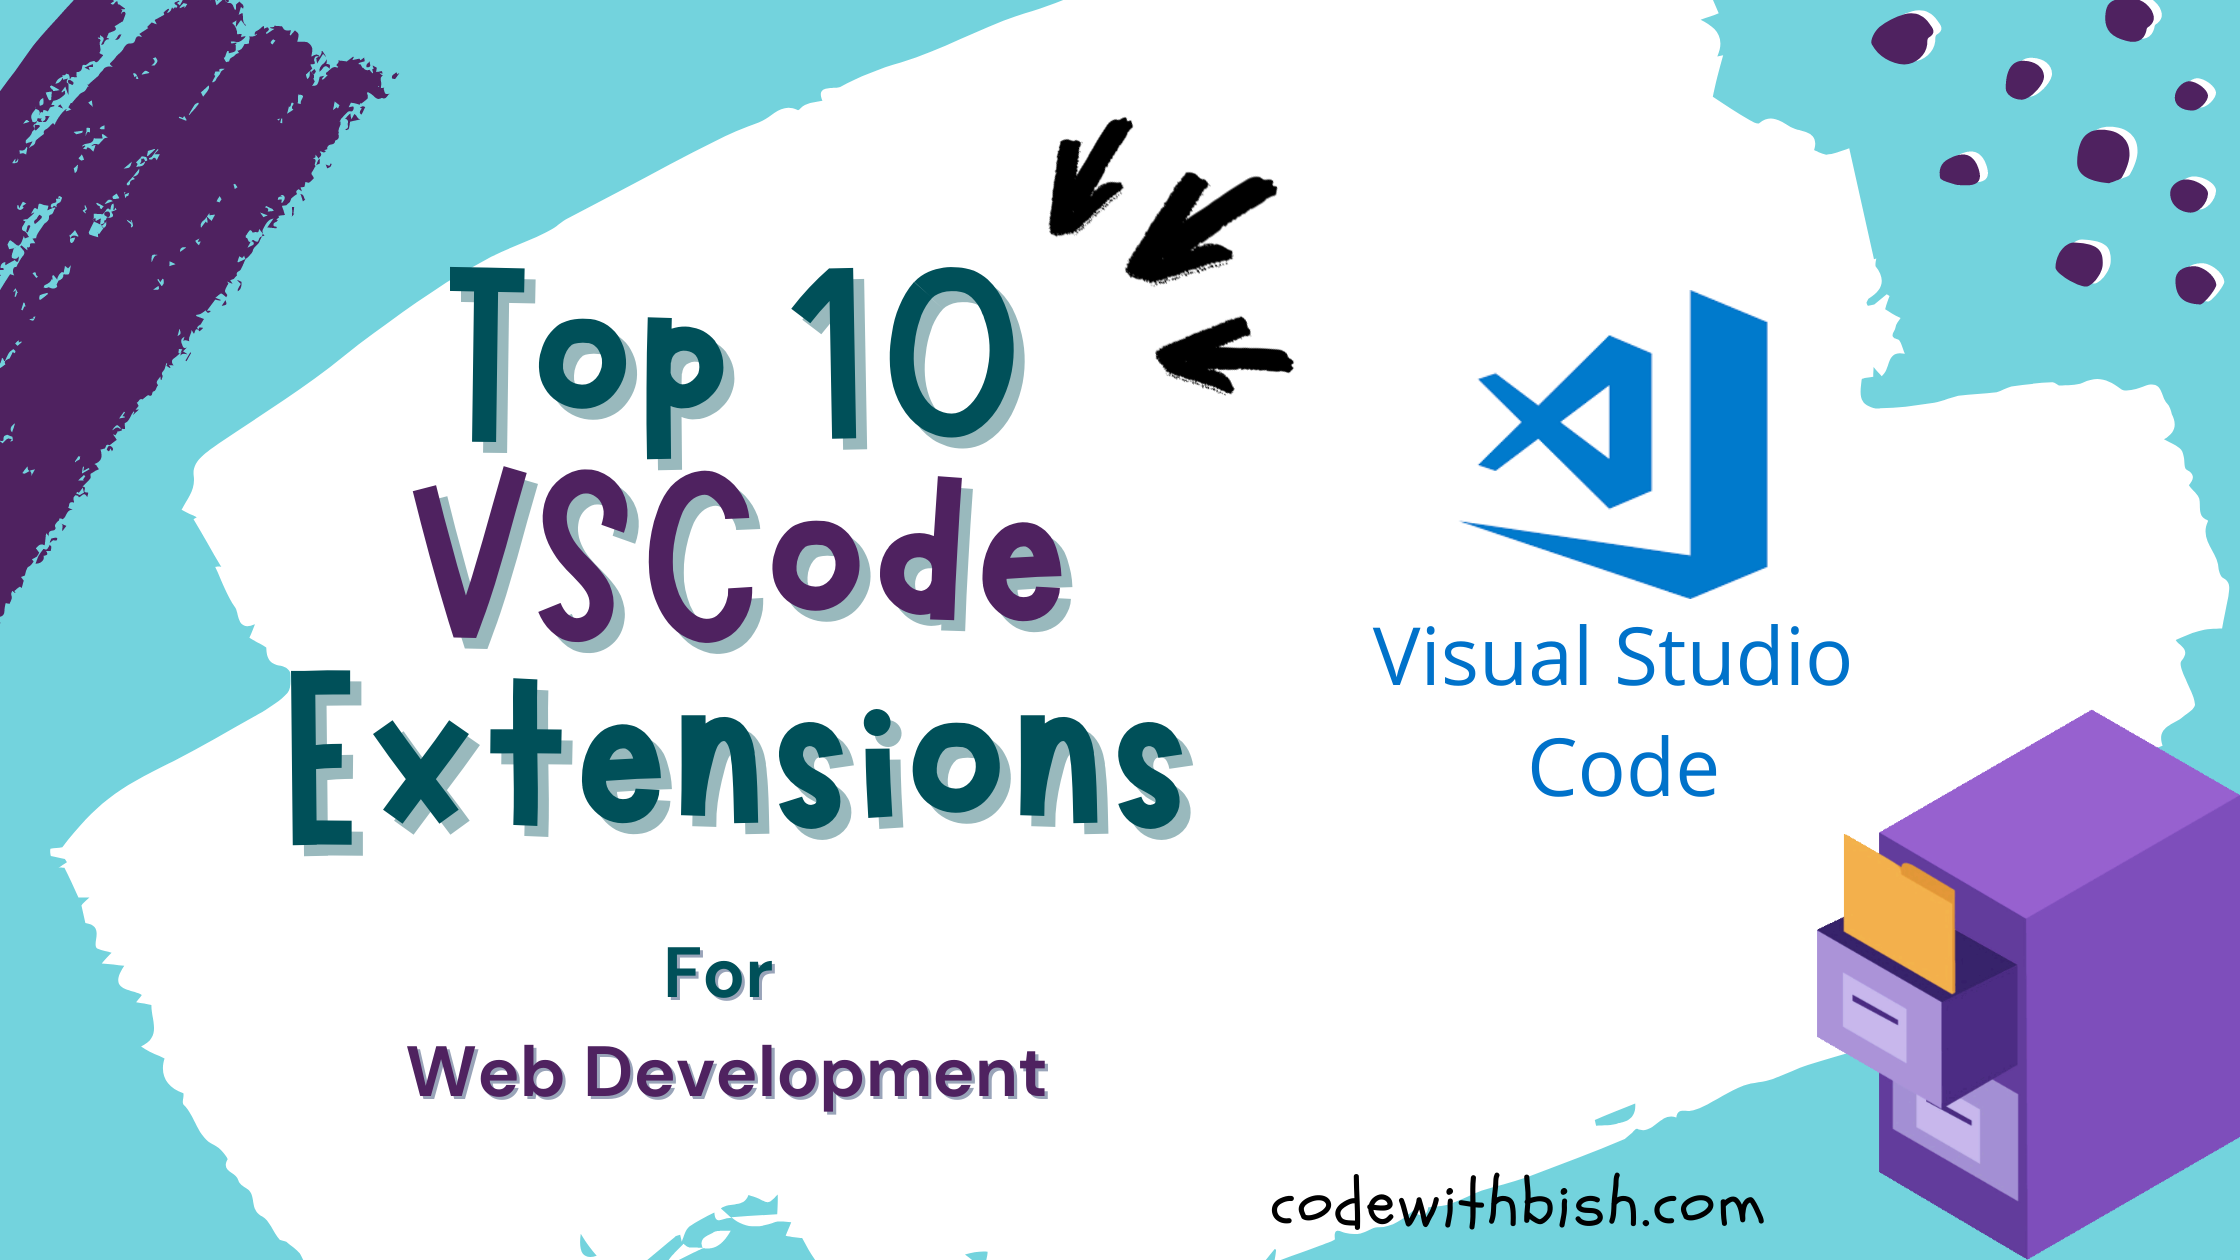 10 Excellent VSCode Extensions You Need For Web Development codewithbish